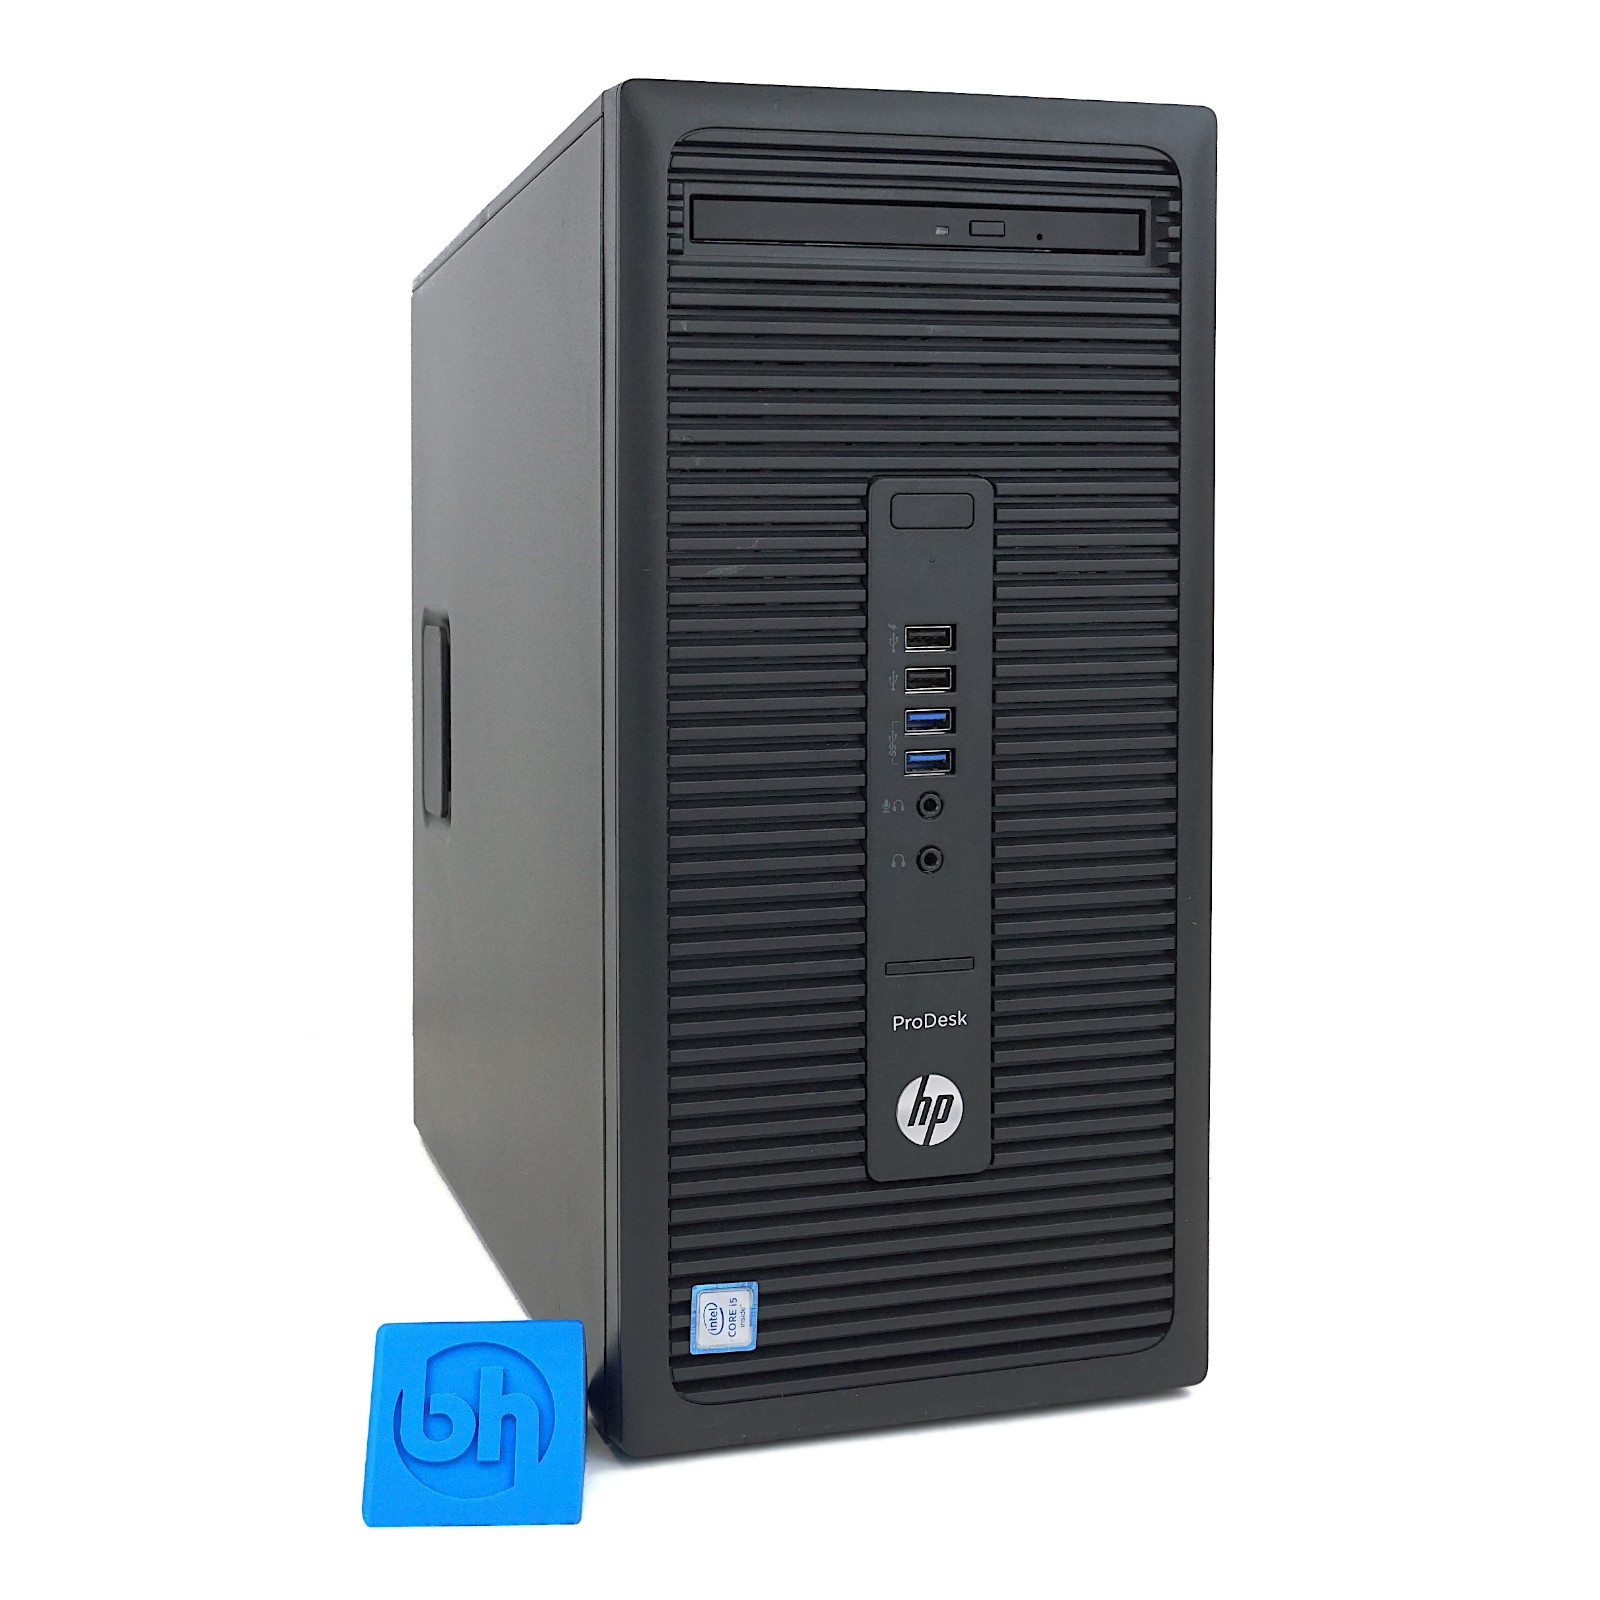 HP ProDesk 600 G2 Microtower Desktop PC Front Angle Left